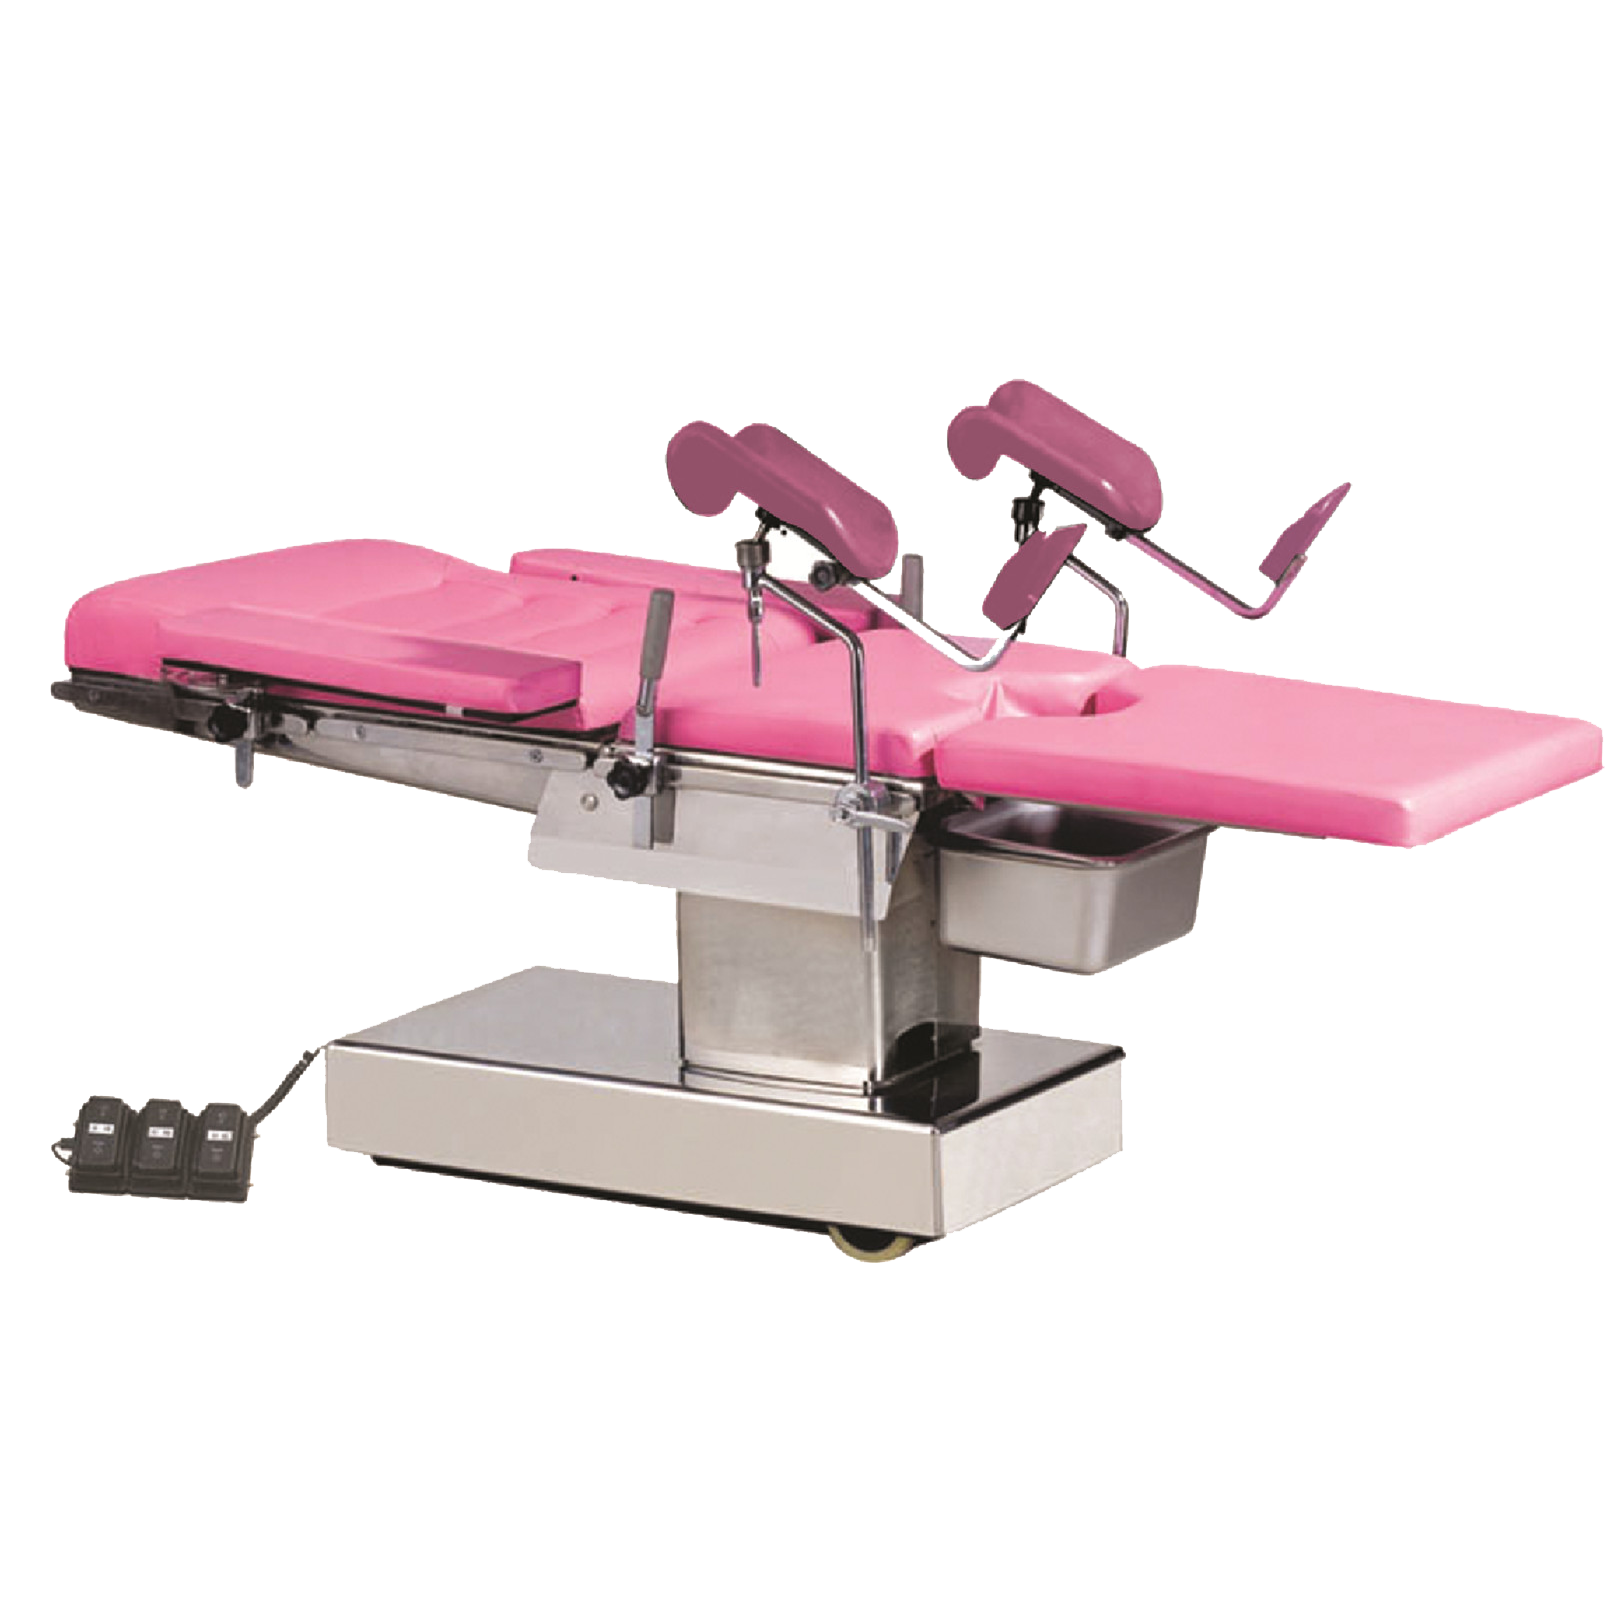 Manual Hydraulic Gynecology operating table medical surgical table for maternity delivery and gynecological